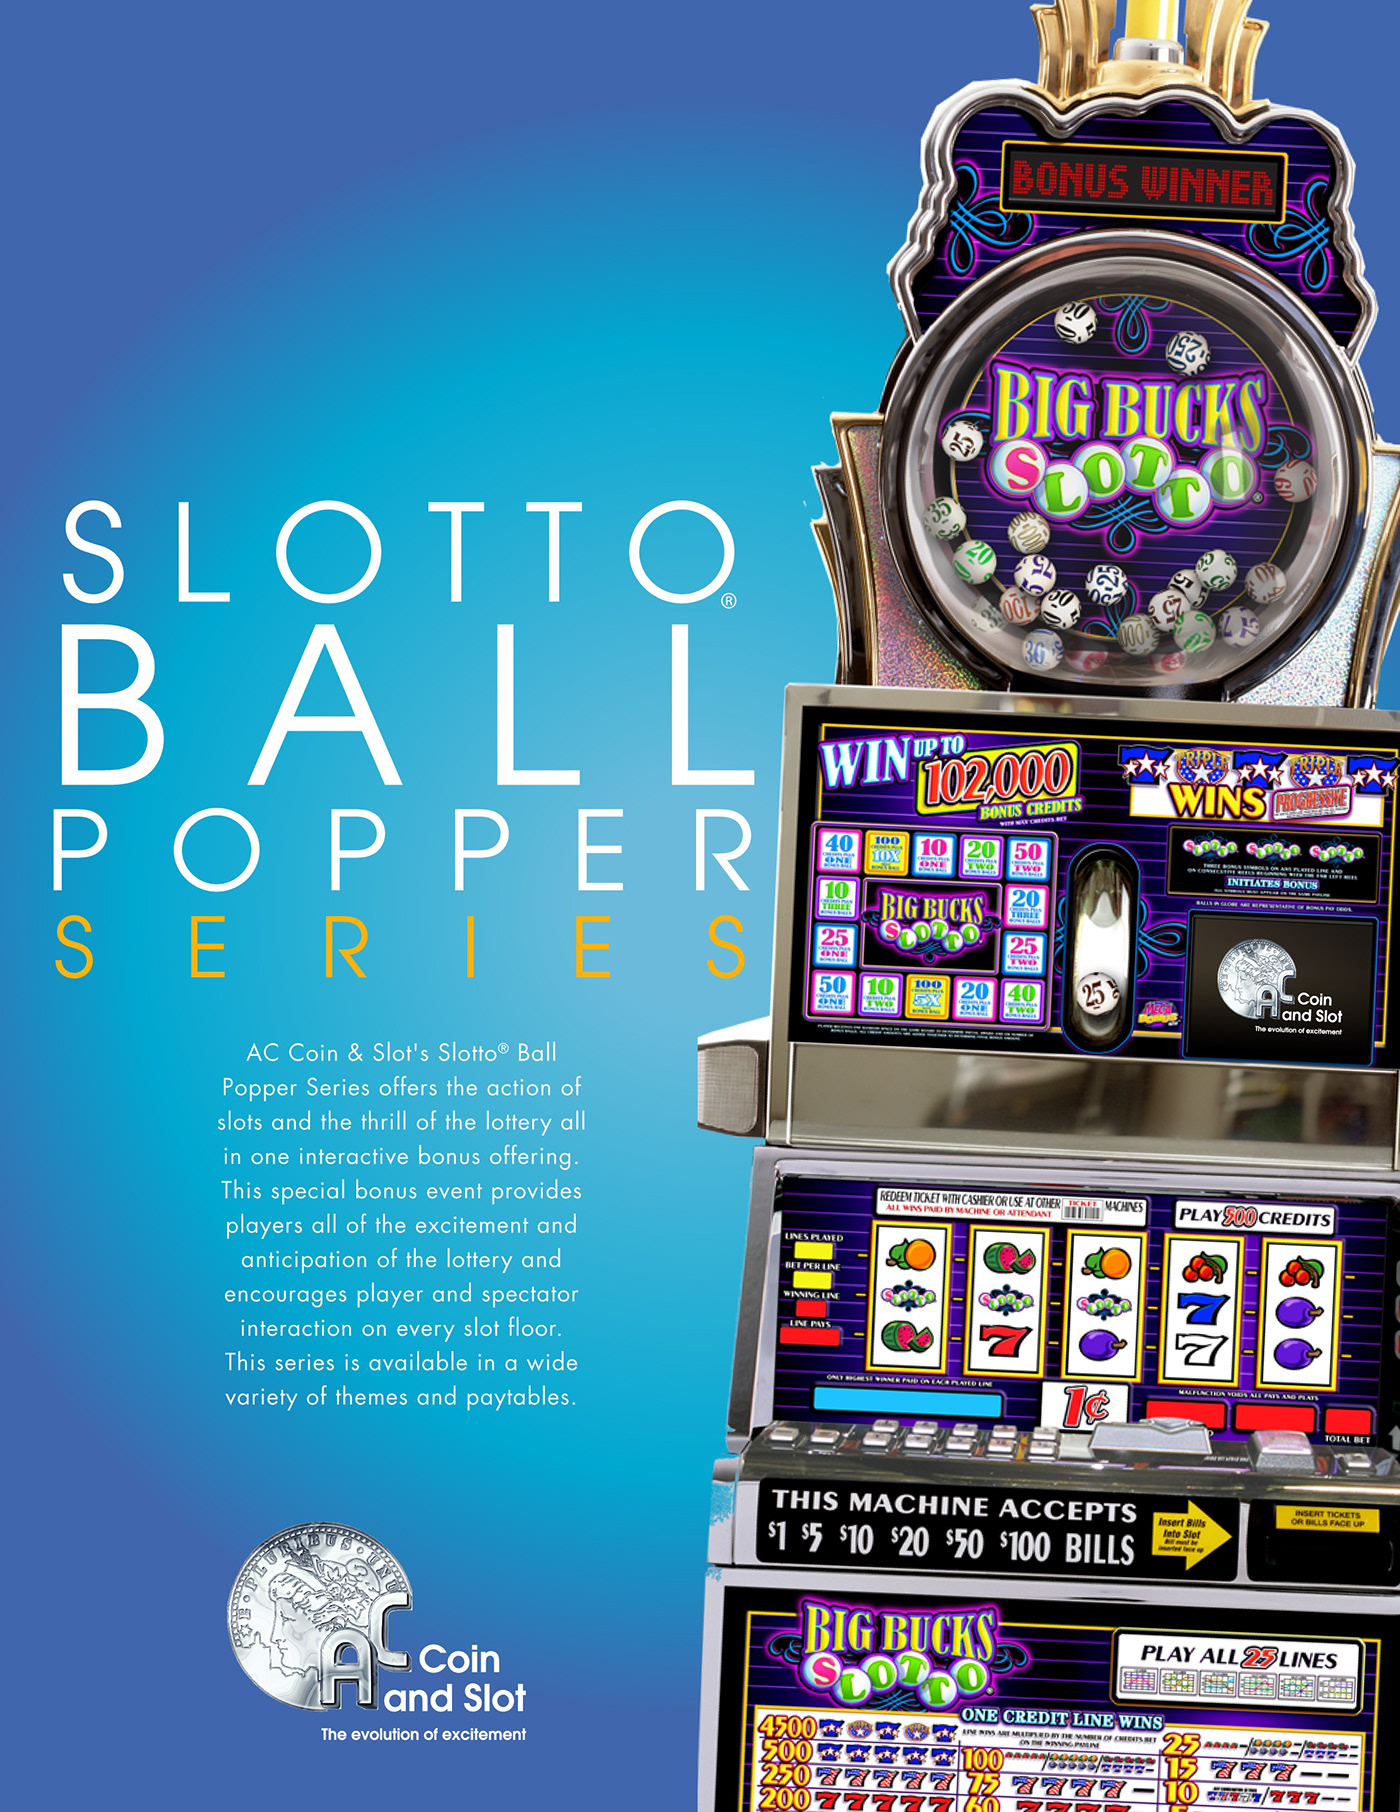 marketing   Collateral sales slot machines